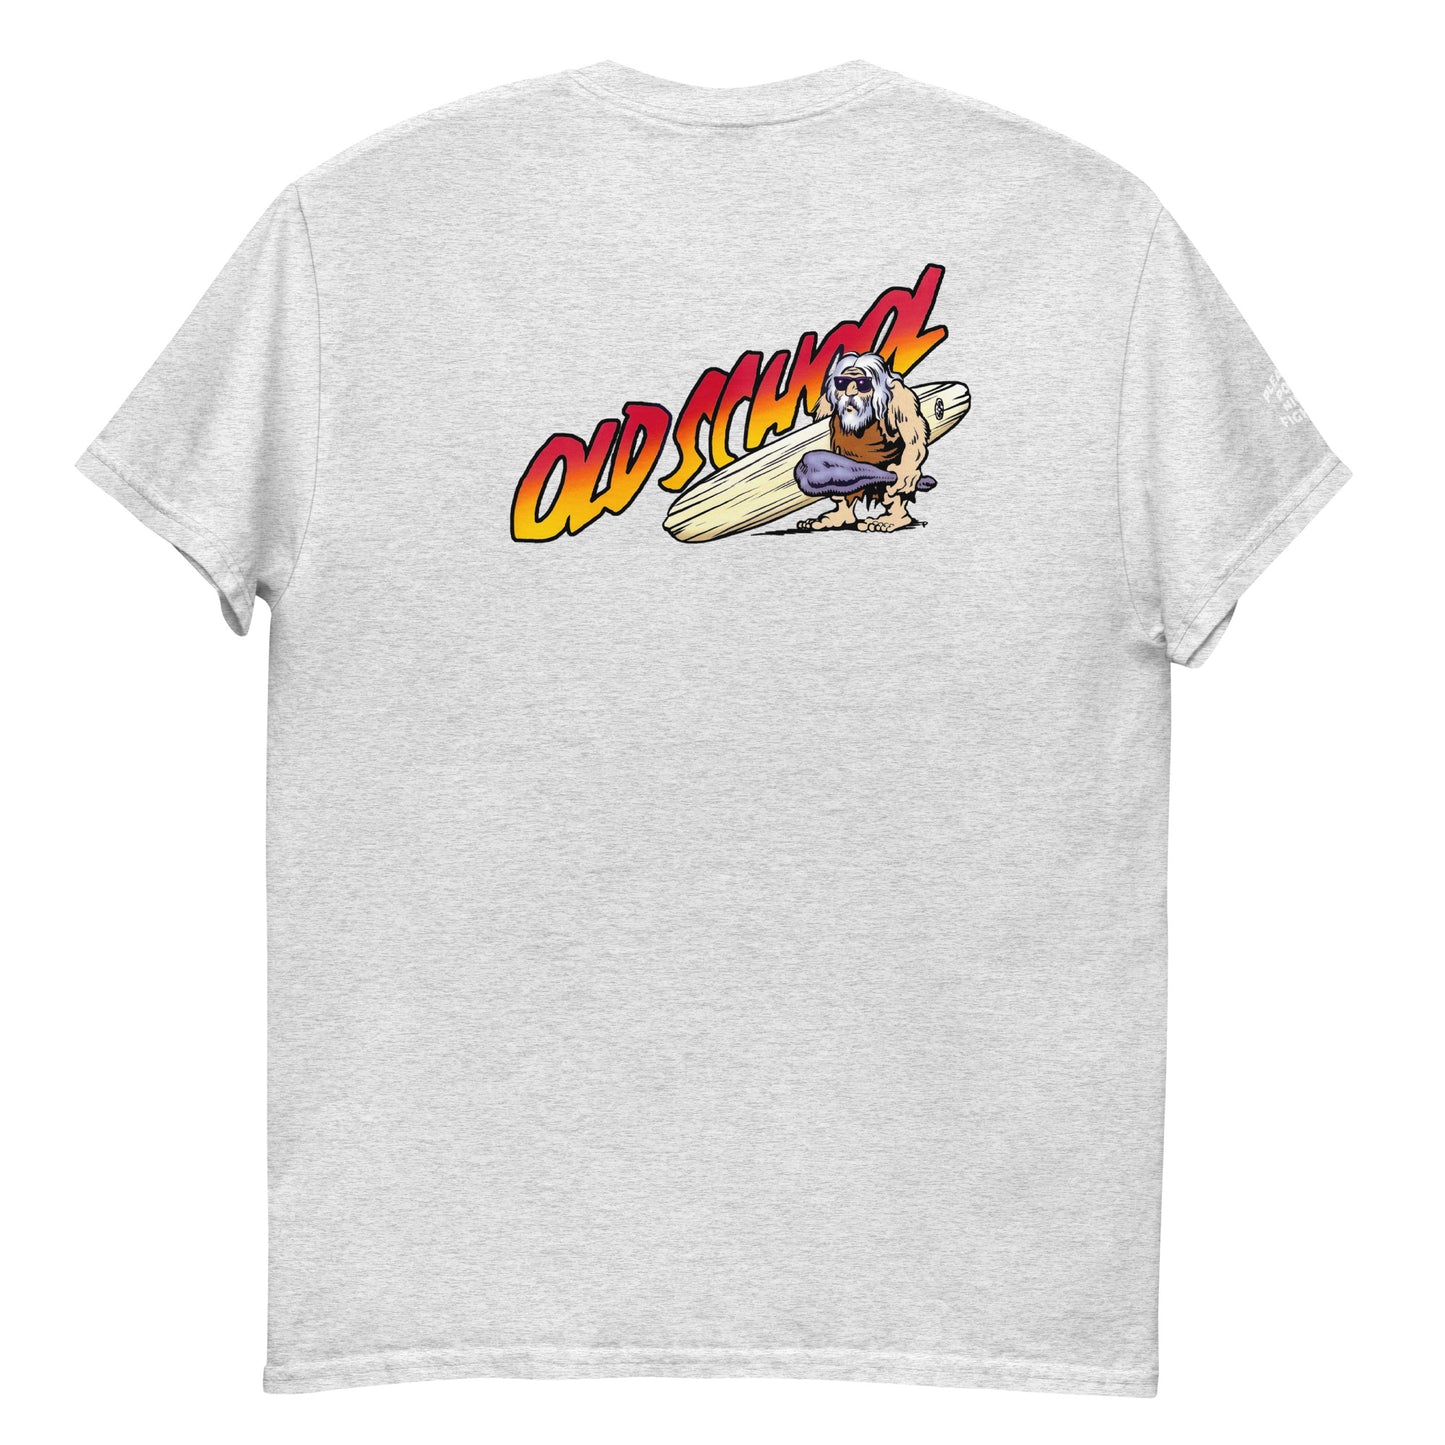 PPNF - OLD SCHOOL - PPNF Retirement Crew Front - PPNF sleeve - Men's classic tee